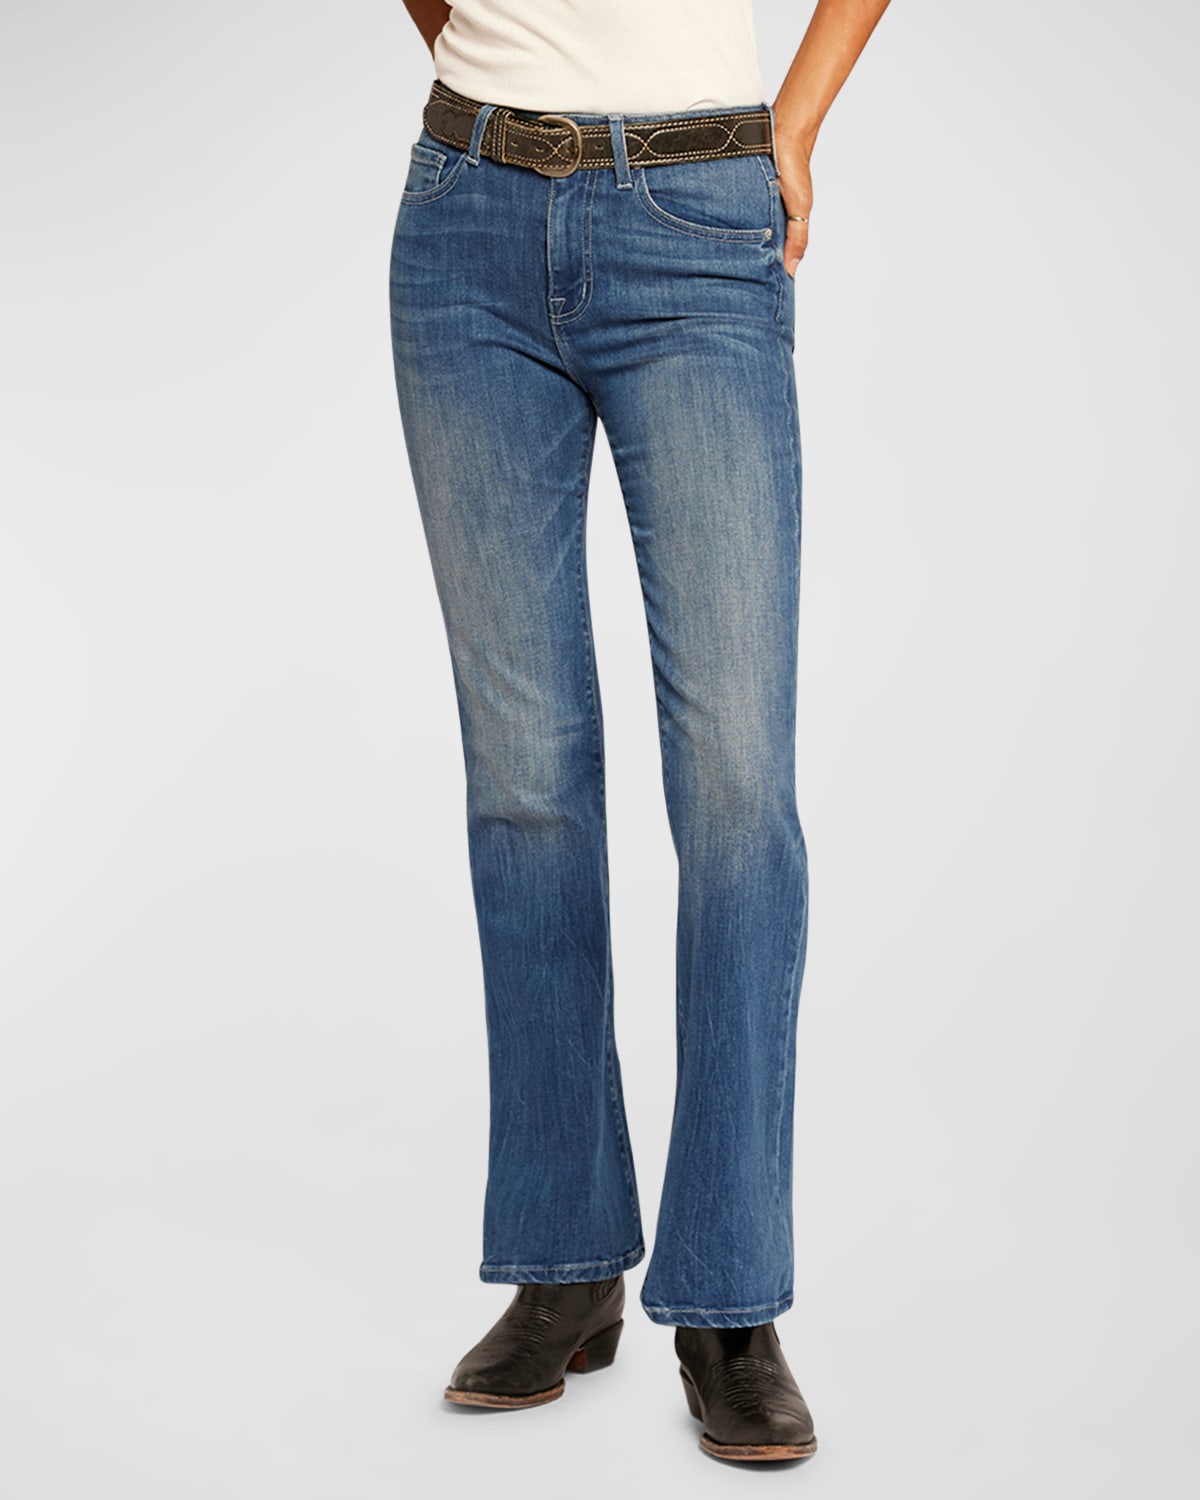 The Promenade Bootcut Jeans